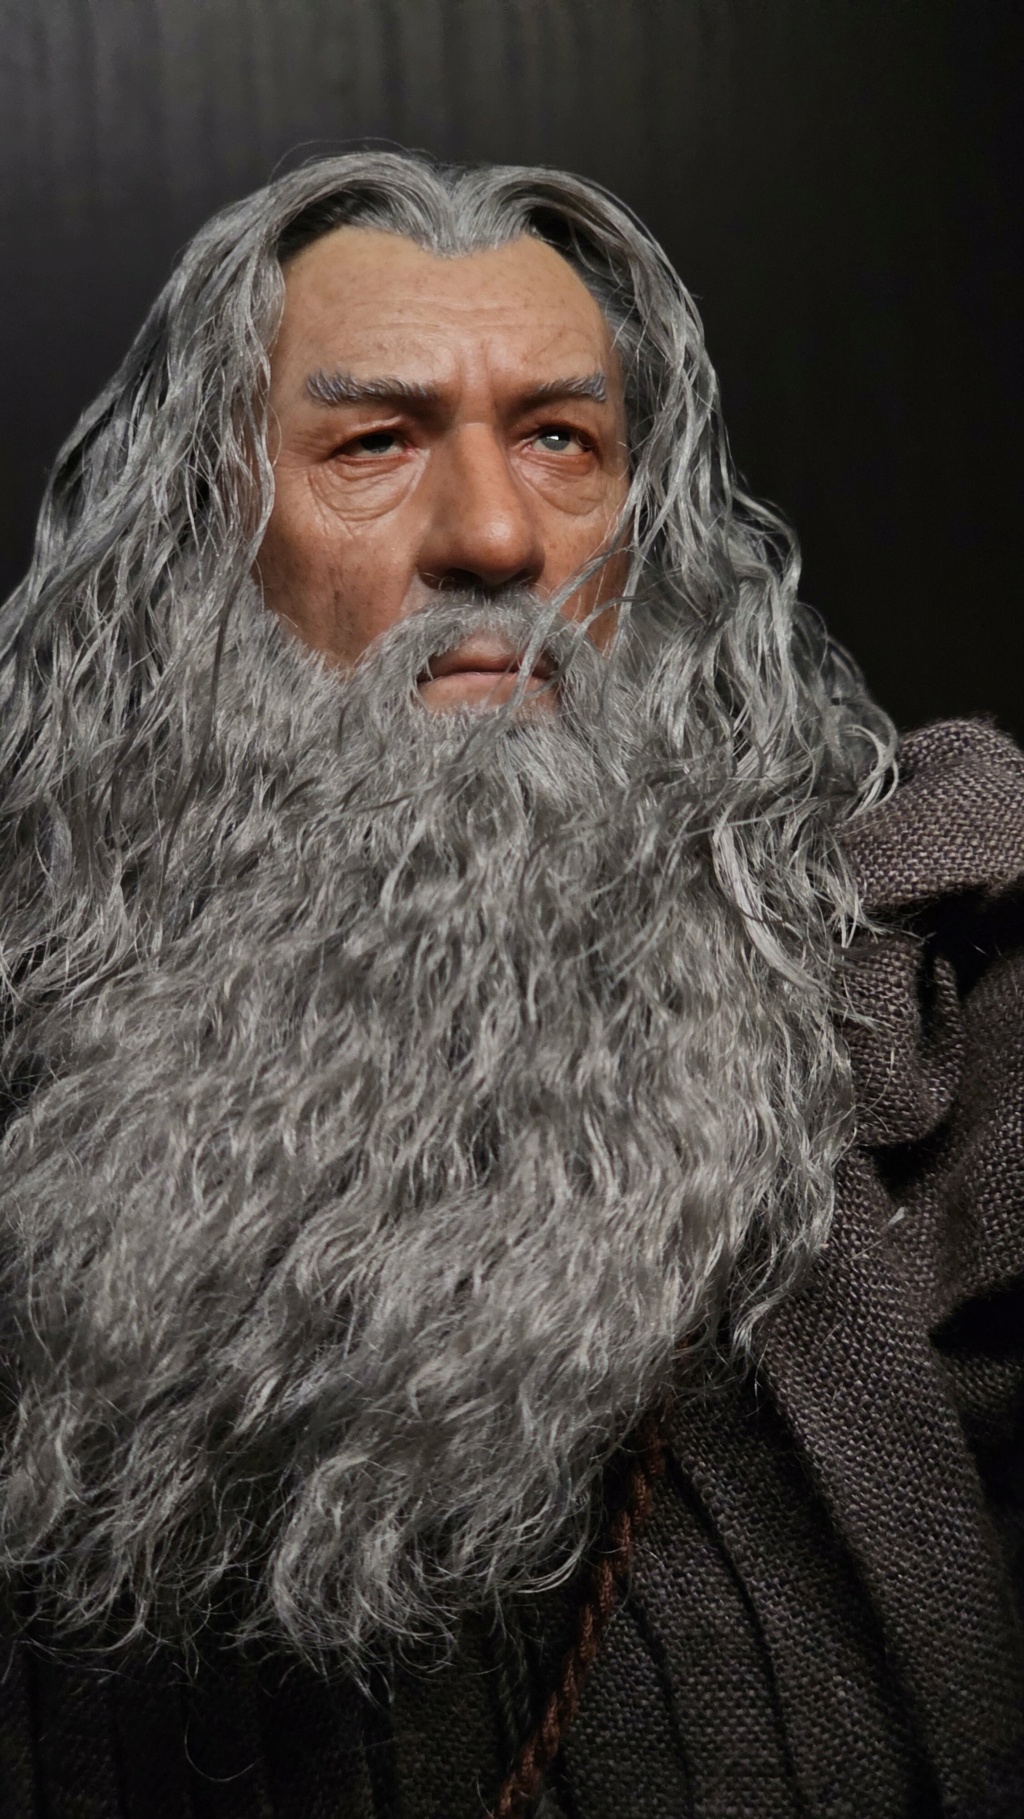 LordoftheRings - NEW PRODUCT: Queen Studios & INART: 1/6 The Lord of the Rings Gandalf (Grey Robe) Action Figure - Page 4 47740710